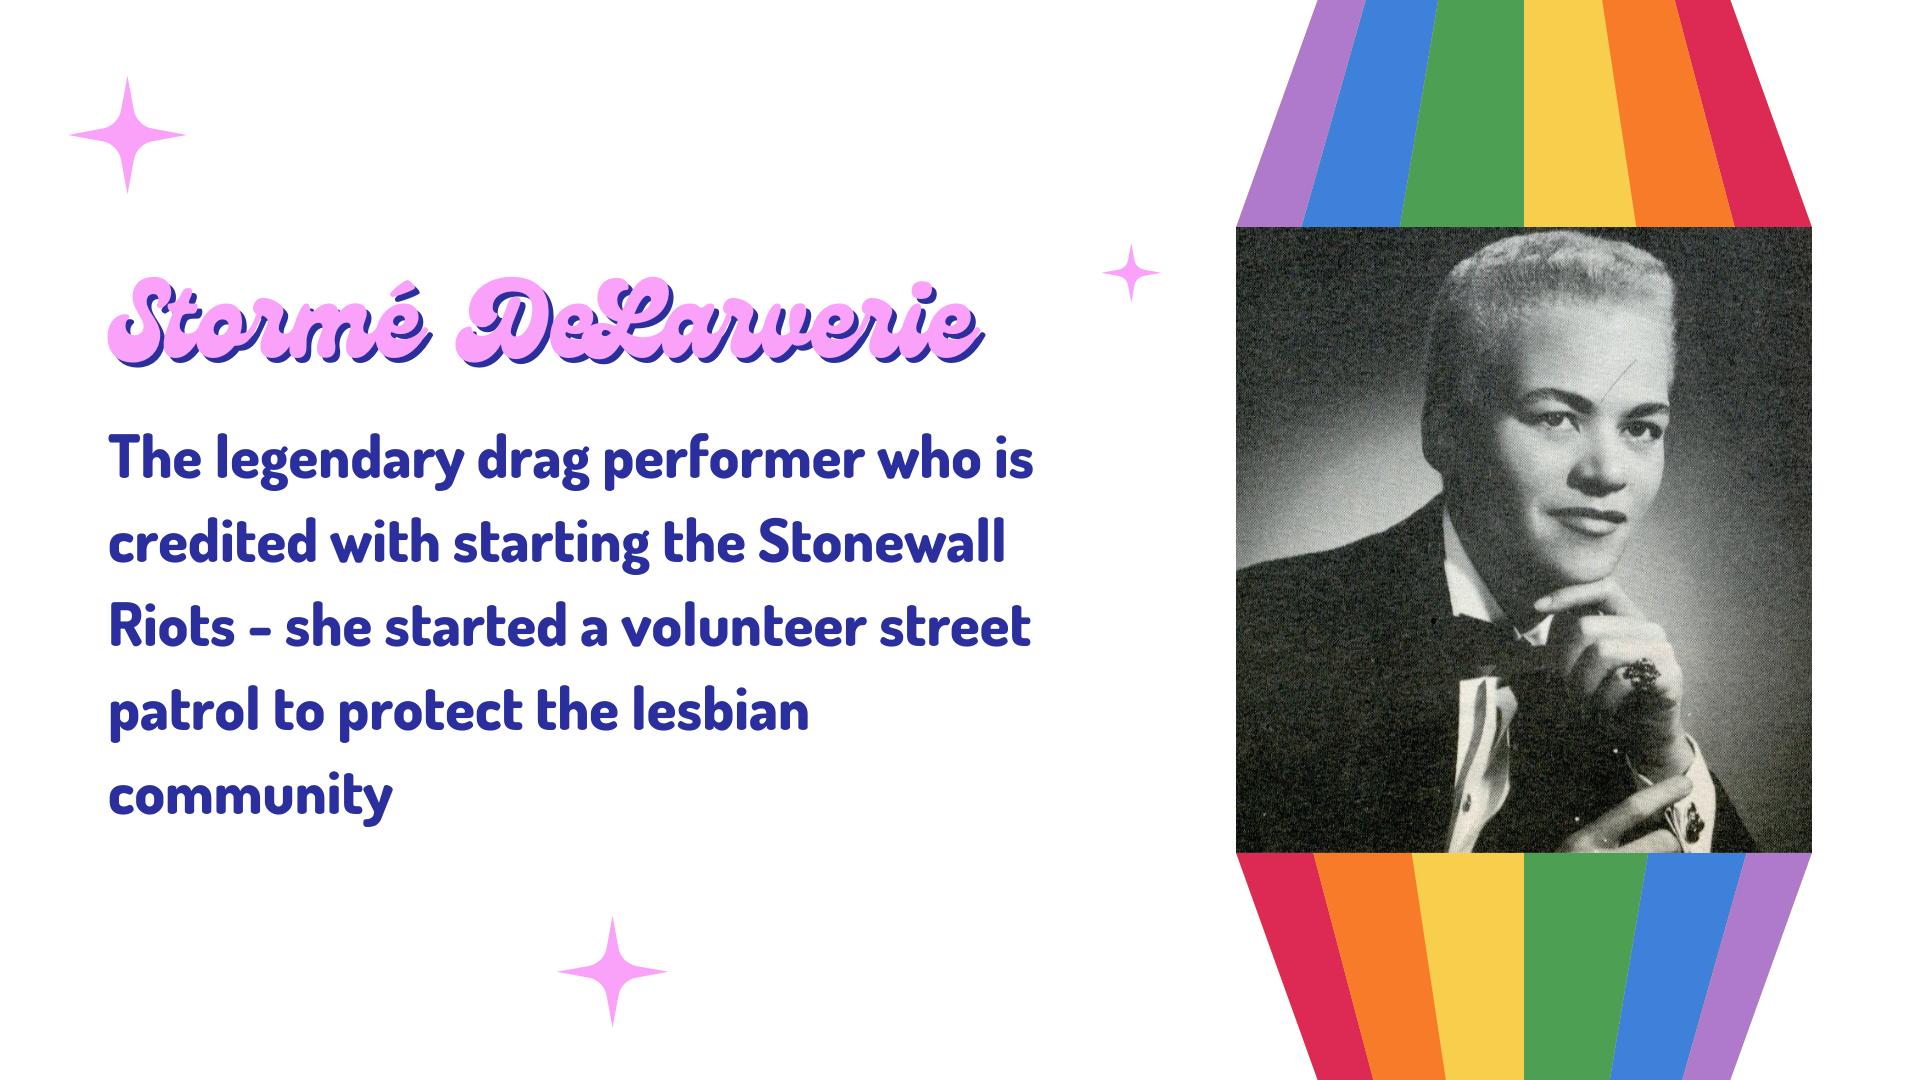 Black and white headshot of a drag king in a black suit and bow tie, hand on chin. Text says "Storme DeLarverie: The legendary drag performer who is credited with starting the Stonewall Riots - she started a volunteer street patrol to protect the lesbian community" 